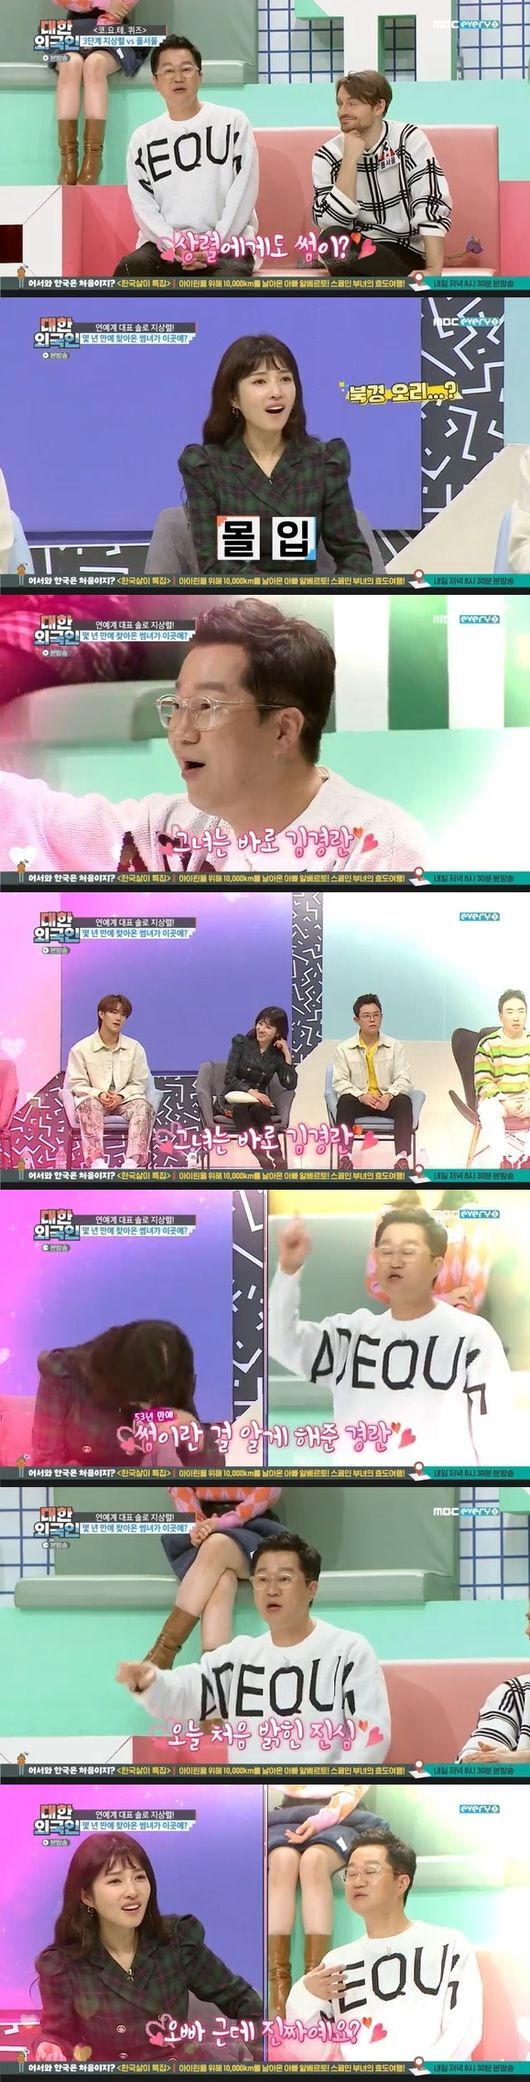 Ji Sang-ryeol Confessions Thumbs He Hidden to Kim Kyung-ranMBC Everlon Entertainment South Korean Foreigners broadcasted on the afternoon of the 16th featured singer Tony Ahn, Kim Kyung-ran, comedian Ji Sang-ryeol, and Piwon Harmony Intak.Representative old bachelor Ji Sang-ryeol said, I did not before, but nowadays I think it comes to the broadcasting station with permission from heaven.In the past, alarms and machines woke up, but now there must be a half like Kim Kyung-ran.I do not think Udambala will appear soon, he said.Kim Kyung-ran smiled, saying, There are Feelings that are like a proposal, so there are Feelings that have received Confessions.Kim Yong-man asked, Do you have anyone in Thumb? And Ji Sang-ryeol said, I sneaked back and forth last year.I do not understand that you know Park Myeong-su, but I do not understand that it is Thumb. If you meet, you meet or not.I ate at the Peking duck house and felt Oh, this is Thumb. The main character is Kim Kyung-ran.Kim Kyung-ran recalled the time, saying, I first knew this is a thumb.Ji Sang-ryeol said, Theres no reason. What is this? You want to meet me? Its not like this.The temperature of the meeting with the previous women is different. Im talking about it for the first time today. Tony Ahn wondered, Sum should feel each other? and Ji Sang-ryeol replied, One-sided Thumb; Kim Kyung-ran said, I never knew.That was the first time in five years that my brother and I had met on the air and never met in private.Its my third meeting today, he said, surprised.Embarrassed Kim Kyung-ran asked, Is your brother real? and Ji Sang-ryeol said it was real and not a lie.However, Kim Kyung-ran said, When I saw my brother not getting heavy snow in the right answer, Park Myeong-su said, Do not meet such a person.If you meet a new relationship, what kind of man do you want to meet?Kim Kyung-ran said, I like a friendly, warm and strong person.  I recently went to a program with six shamans, and according to their stories, I said it would be good if I met a foreigner.And it will probably be younger. Ji Sang-ryeol said, Then spit out the ducks. South Korean Foreigners captures broadcast screen